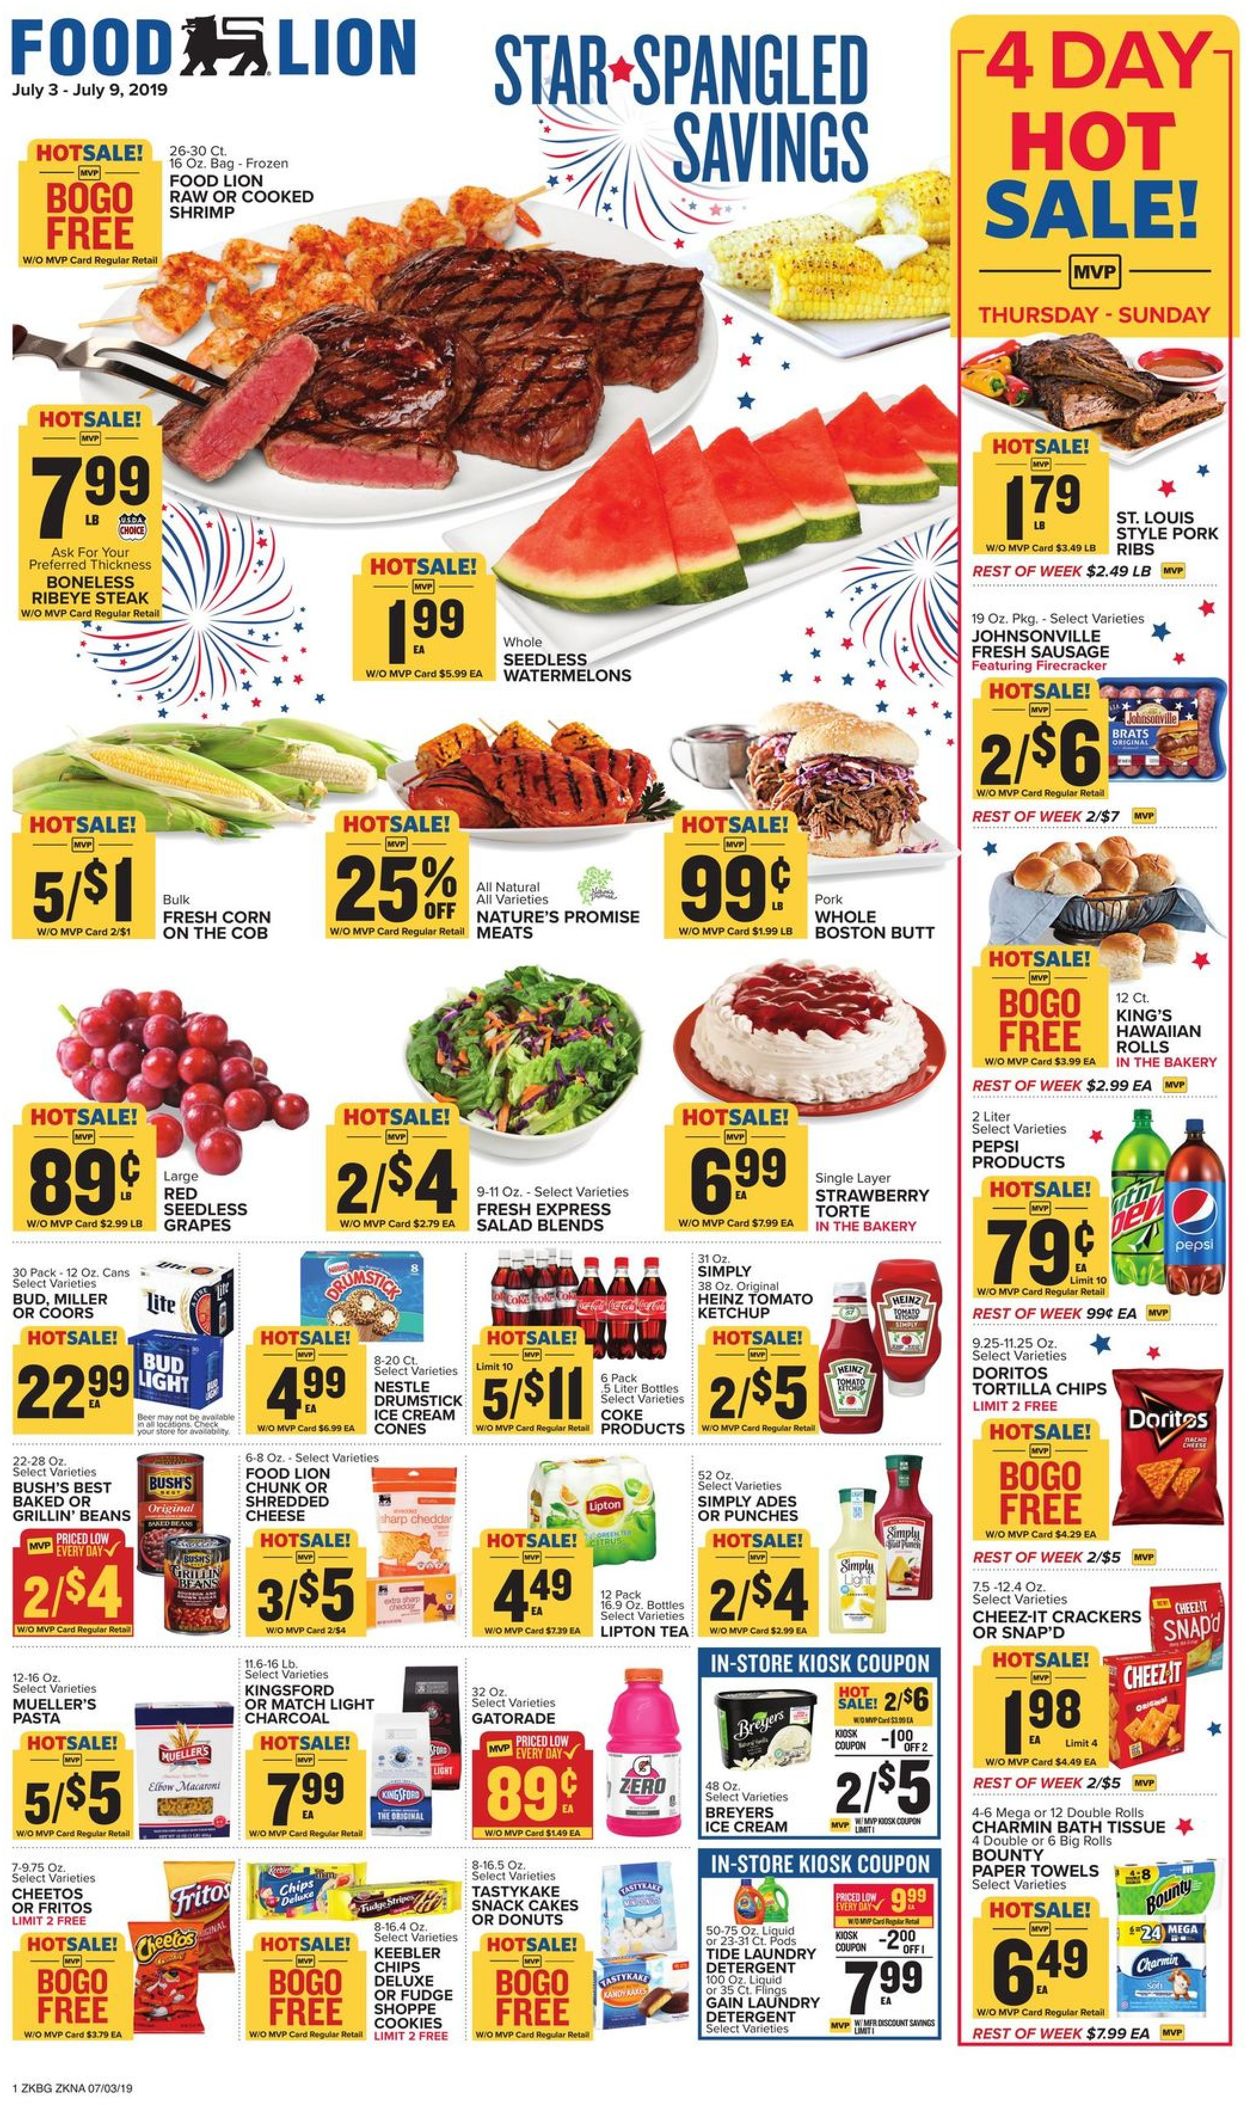 Food Lion Current weekly ad 07/03 - 07/09/2019 - frequent-ads.com